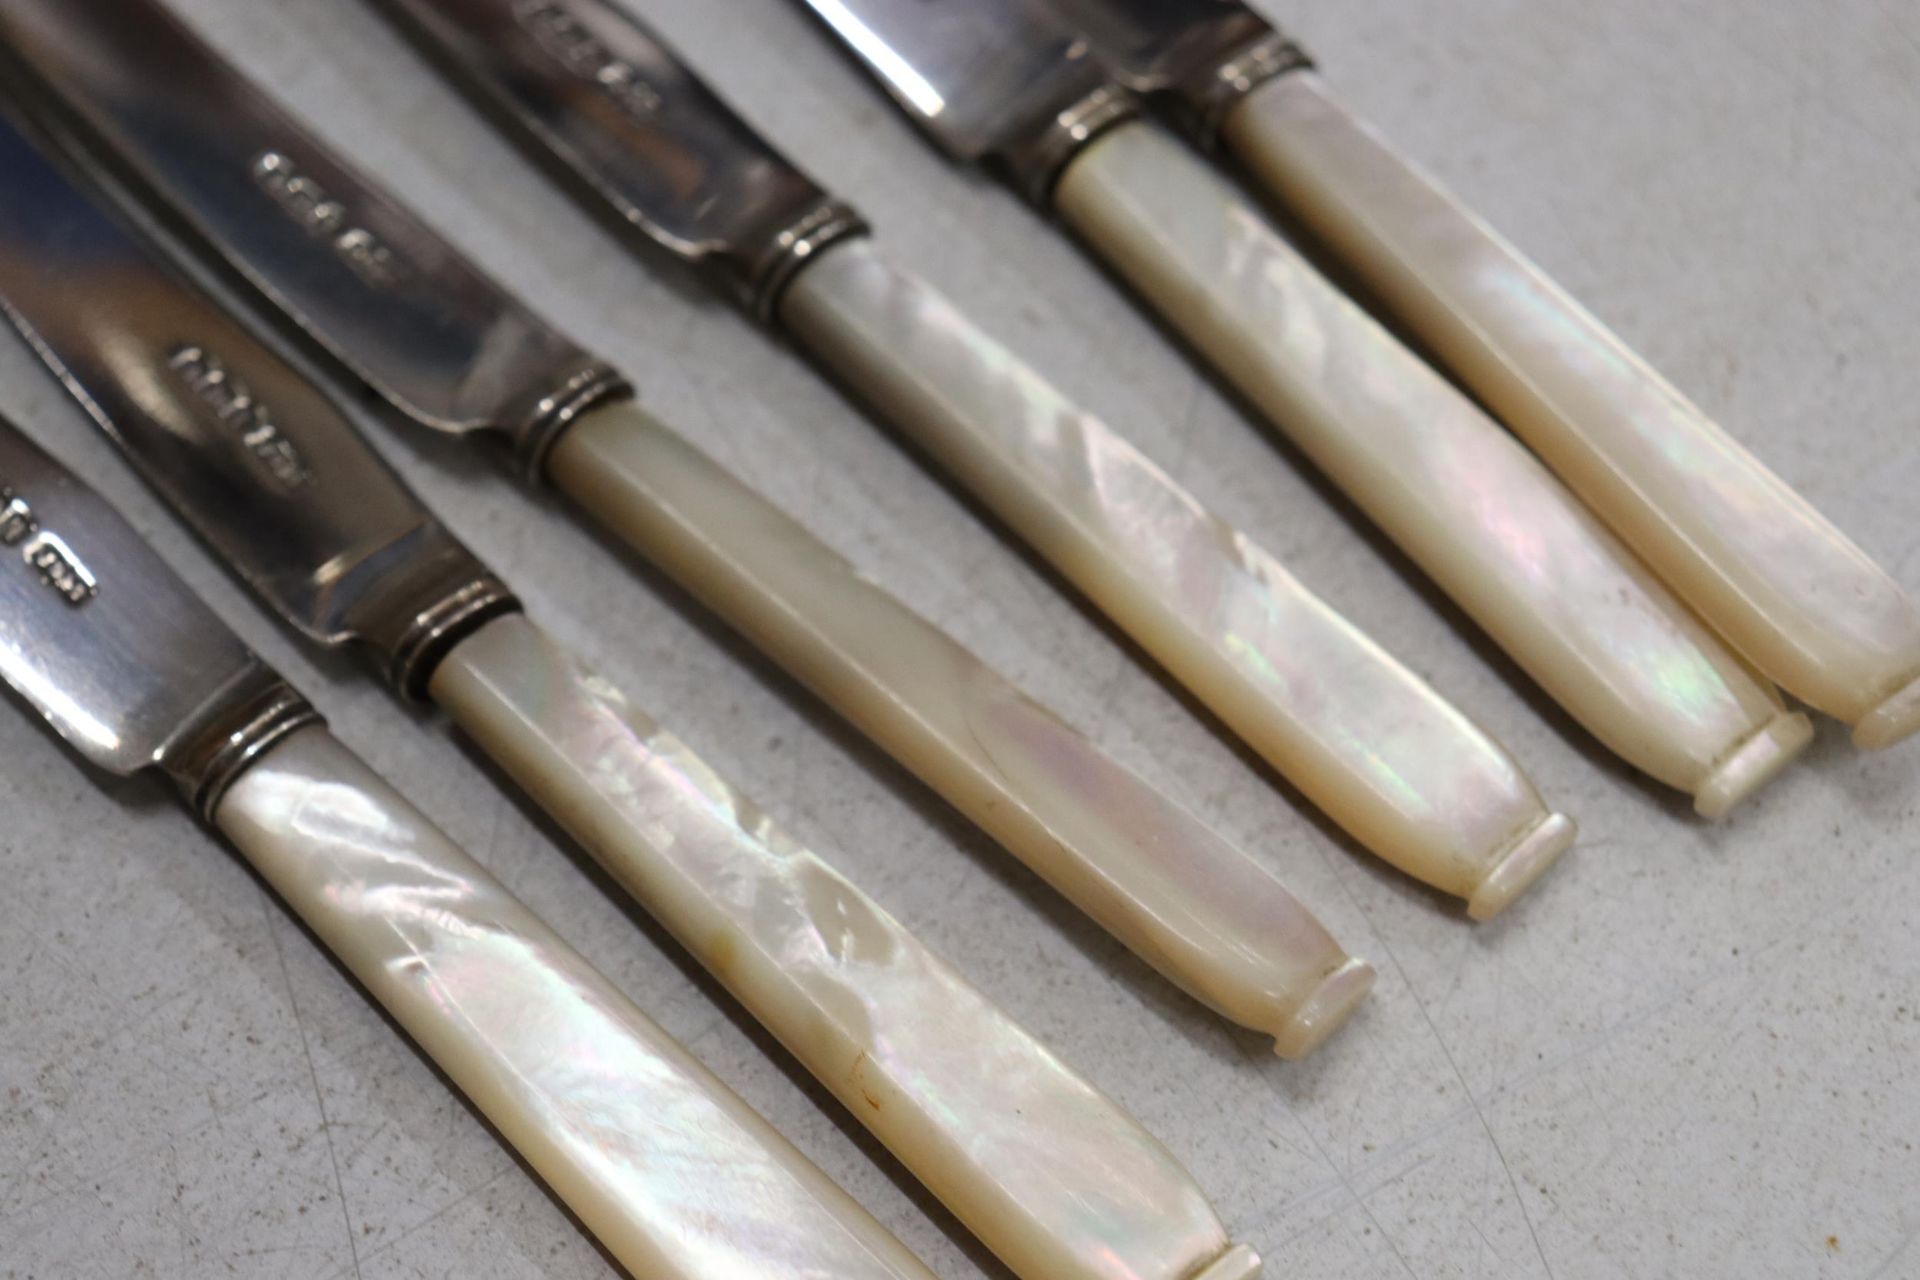 SIX HALLMARKED SHEFFIELD BUTTER KNIVES WITH PEARLISED HANDLES - Image 5 of 7